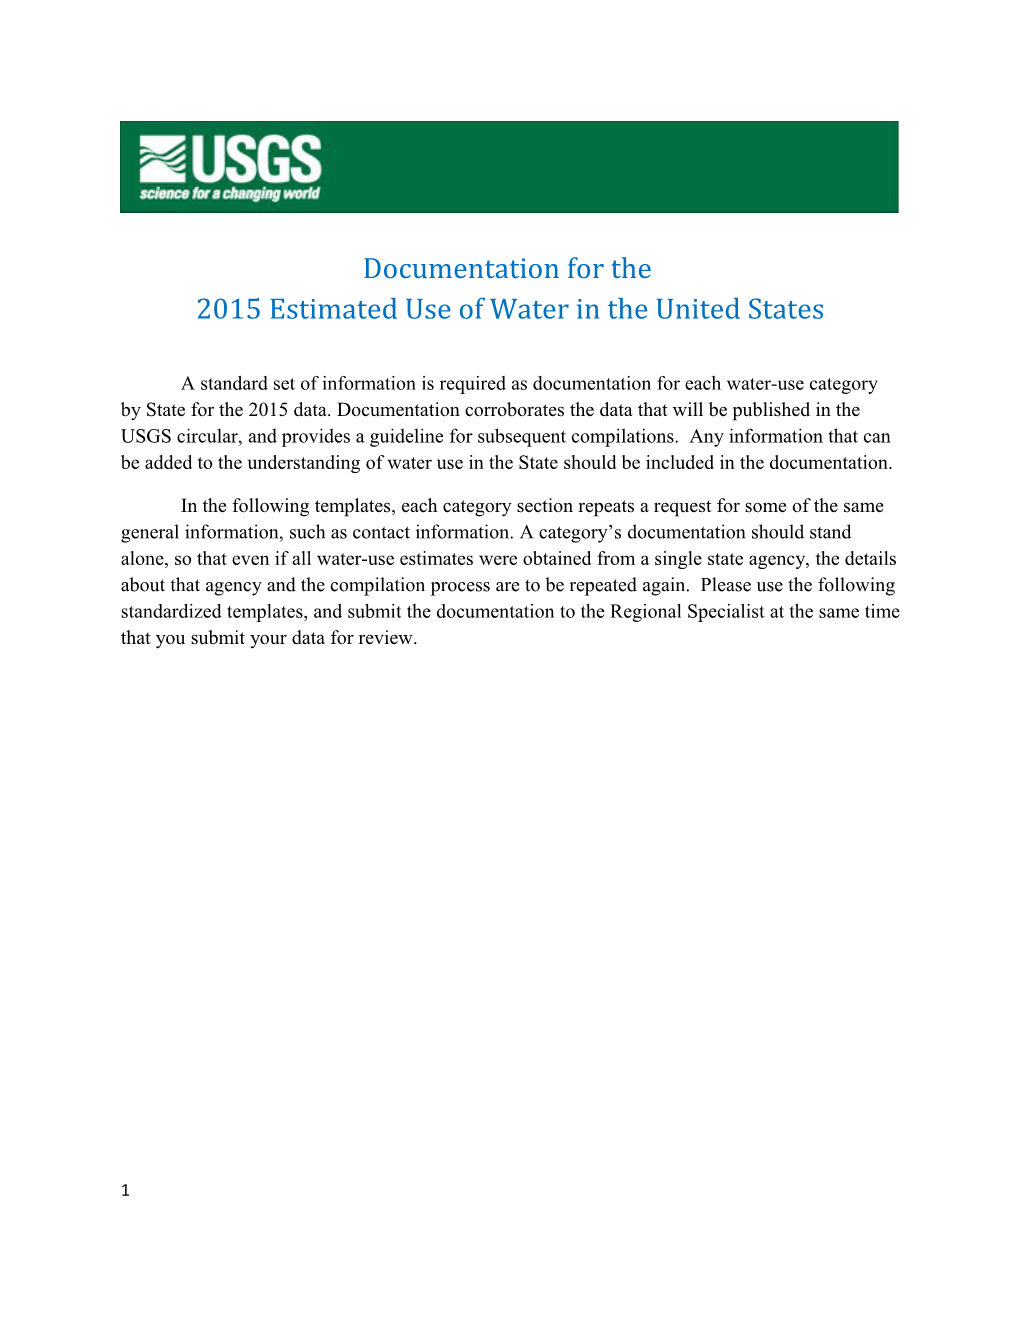 2015 Estimated Use of Water in the United States